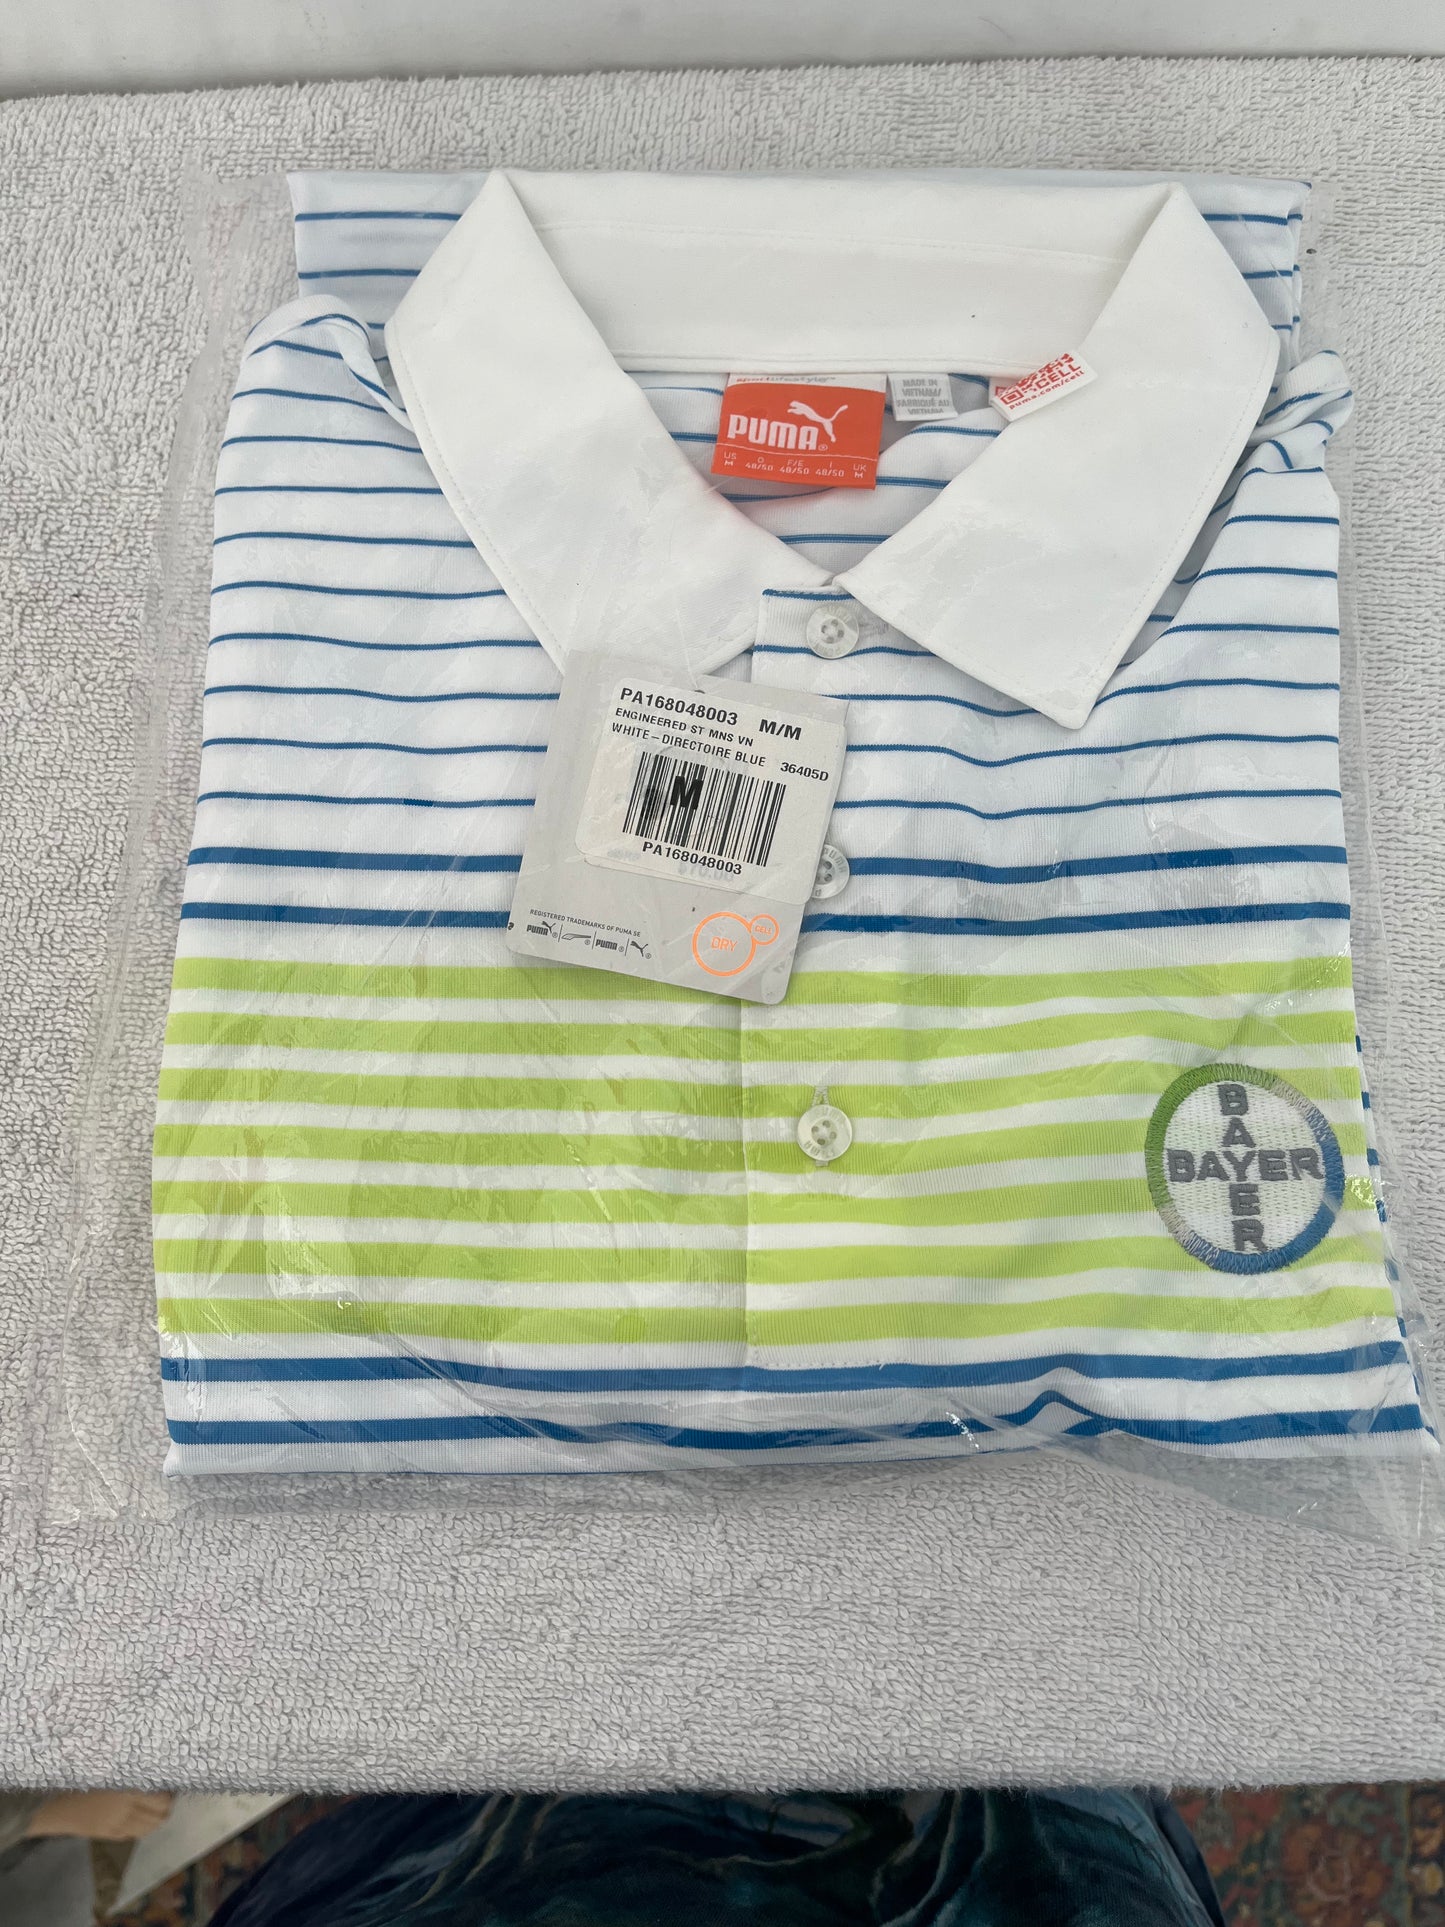 NIP -- Puma Dry Cell Moisture Wicking Green, Blue and White Striped Golf Polo -- M